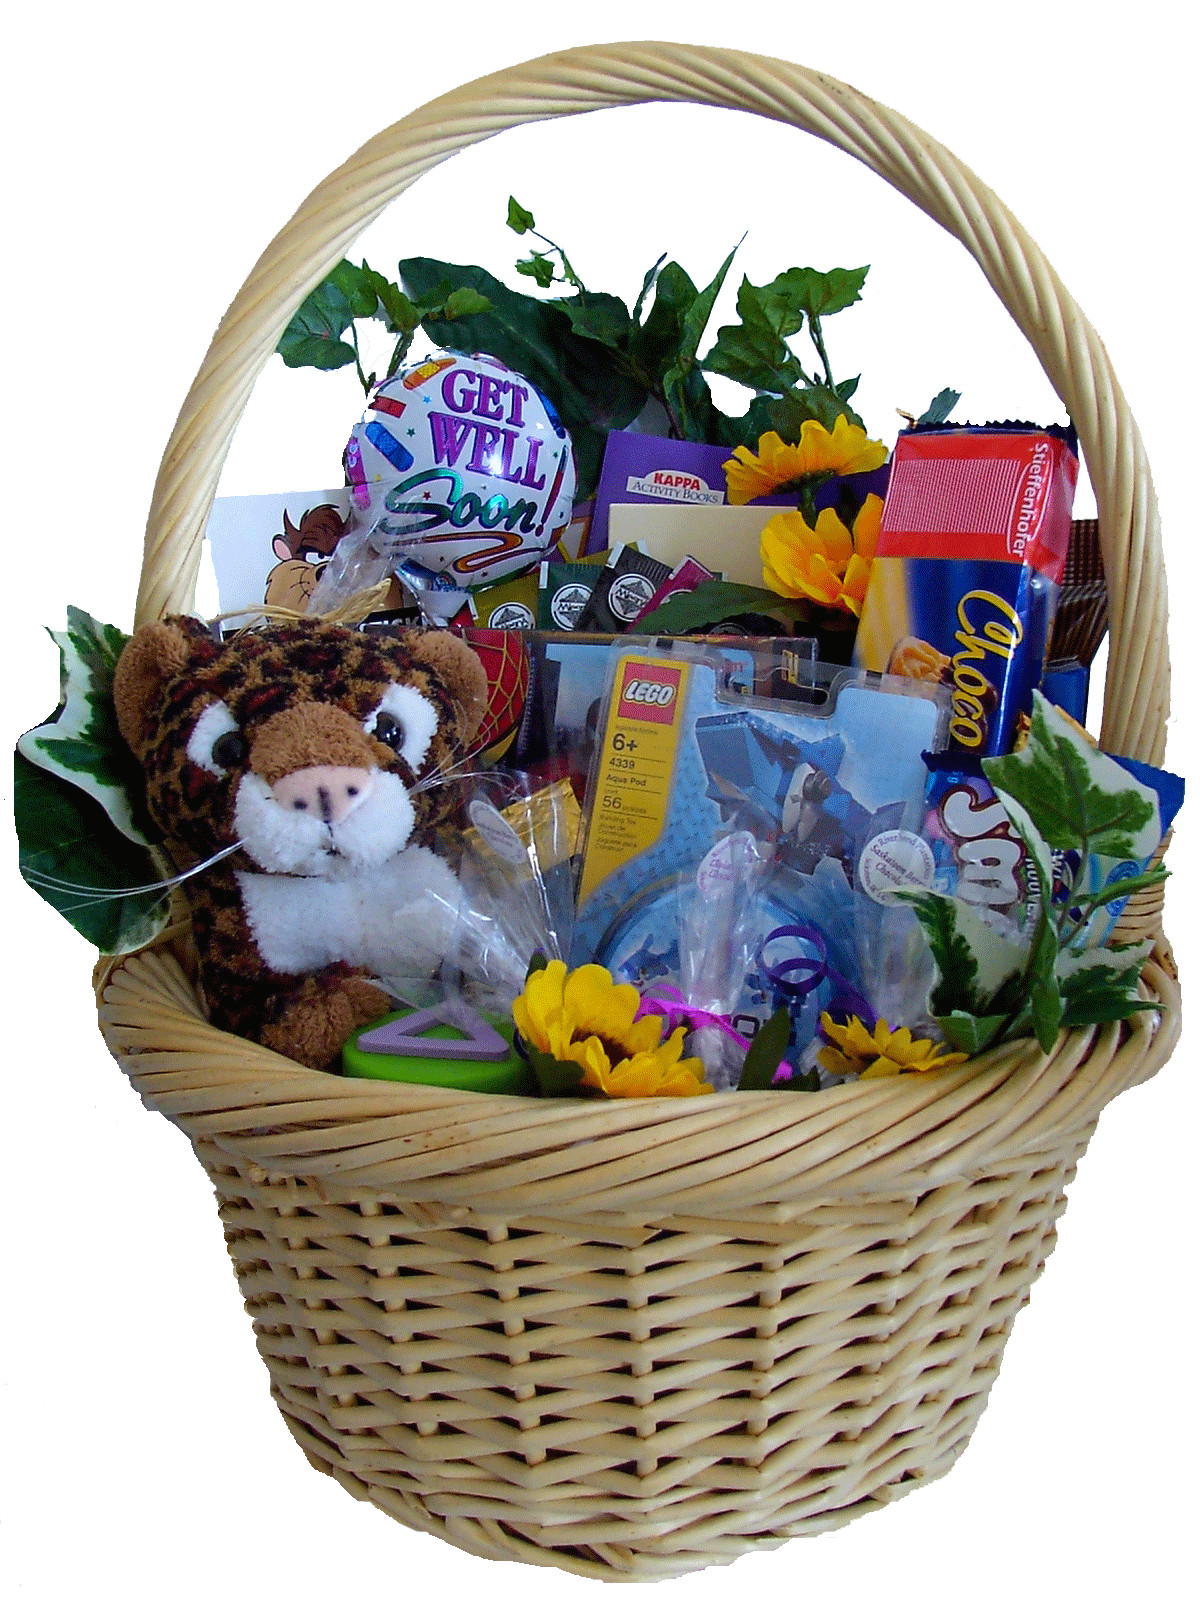 Get Well Gift For Children
 Kids Time Gift Basket Gift Bag for Kids Children Gifts